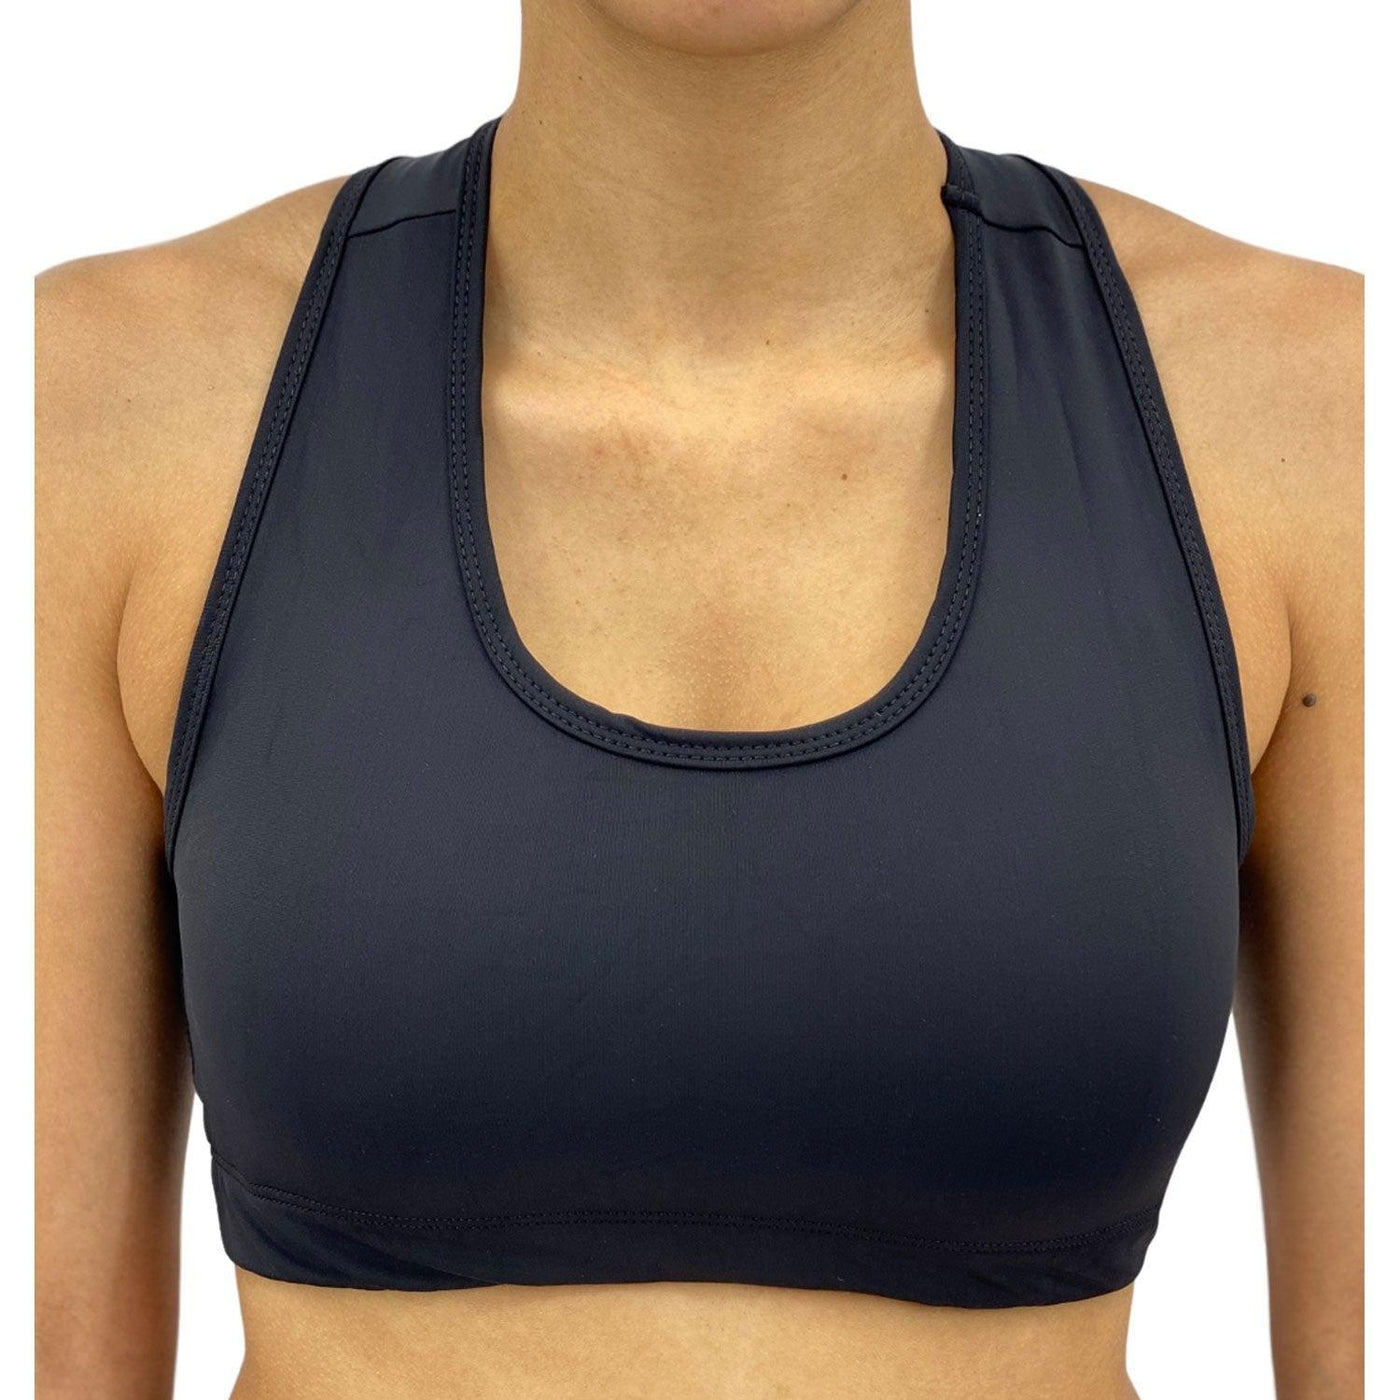 Onyx Solid Color Sports Bra - Buy a Dream